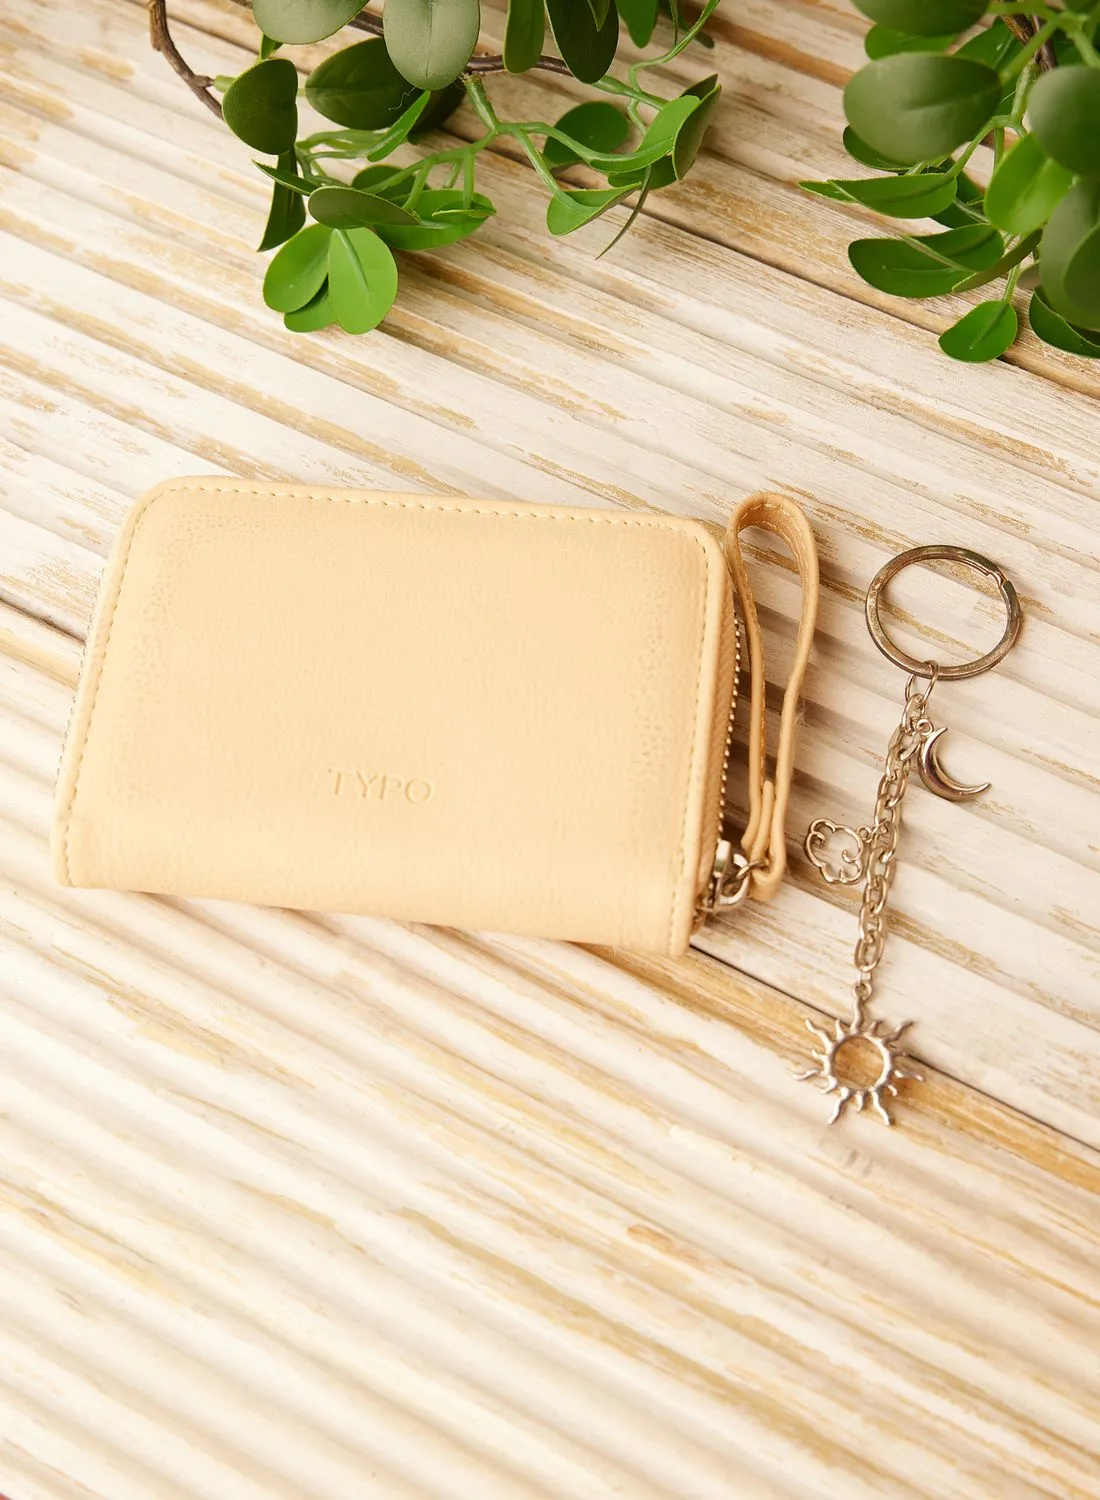 Typo Off The Grid Pouch & Keyring Set